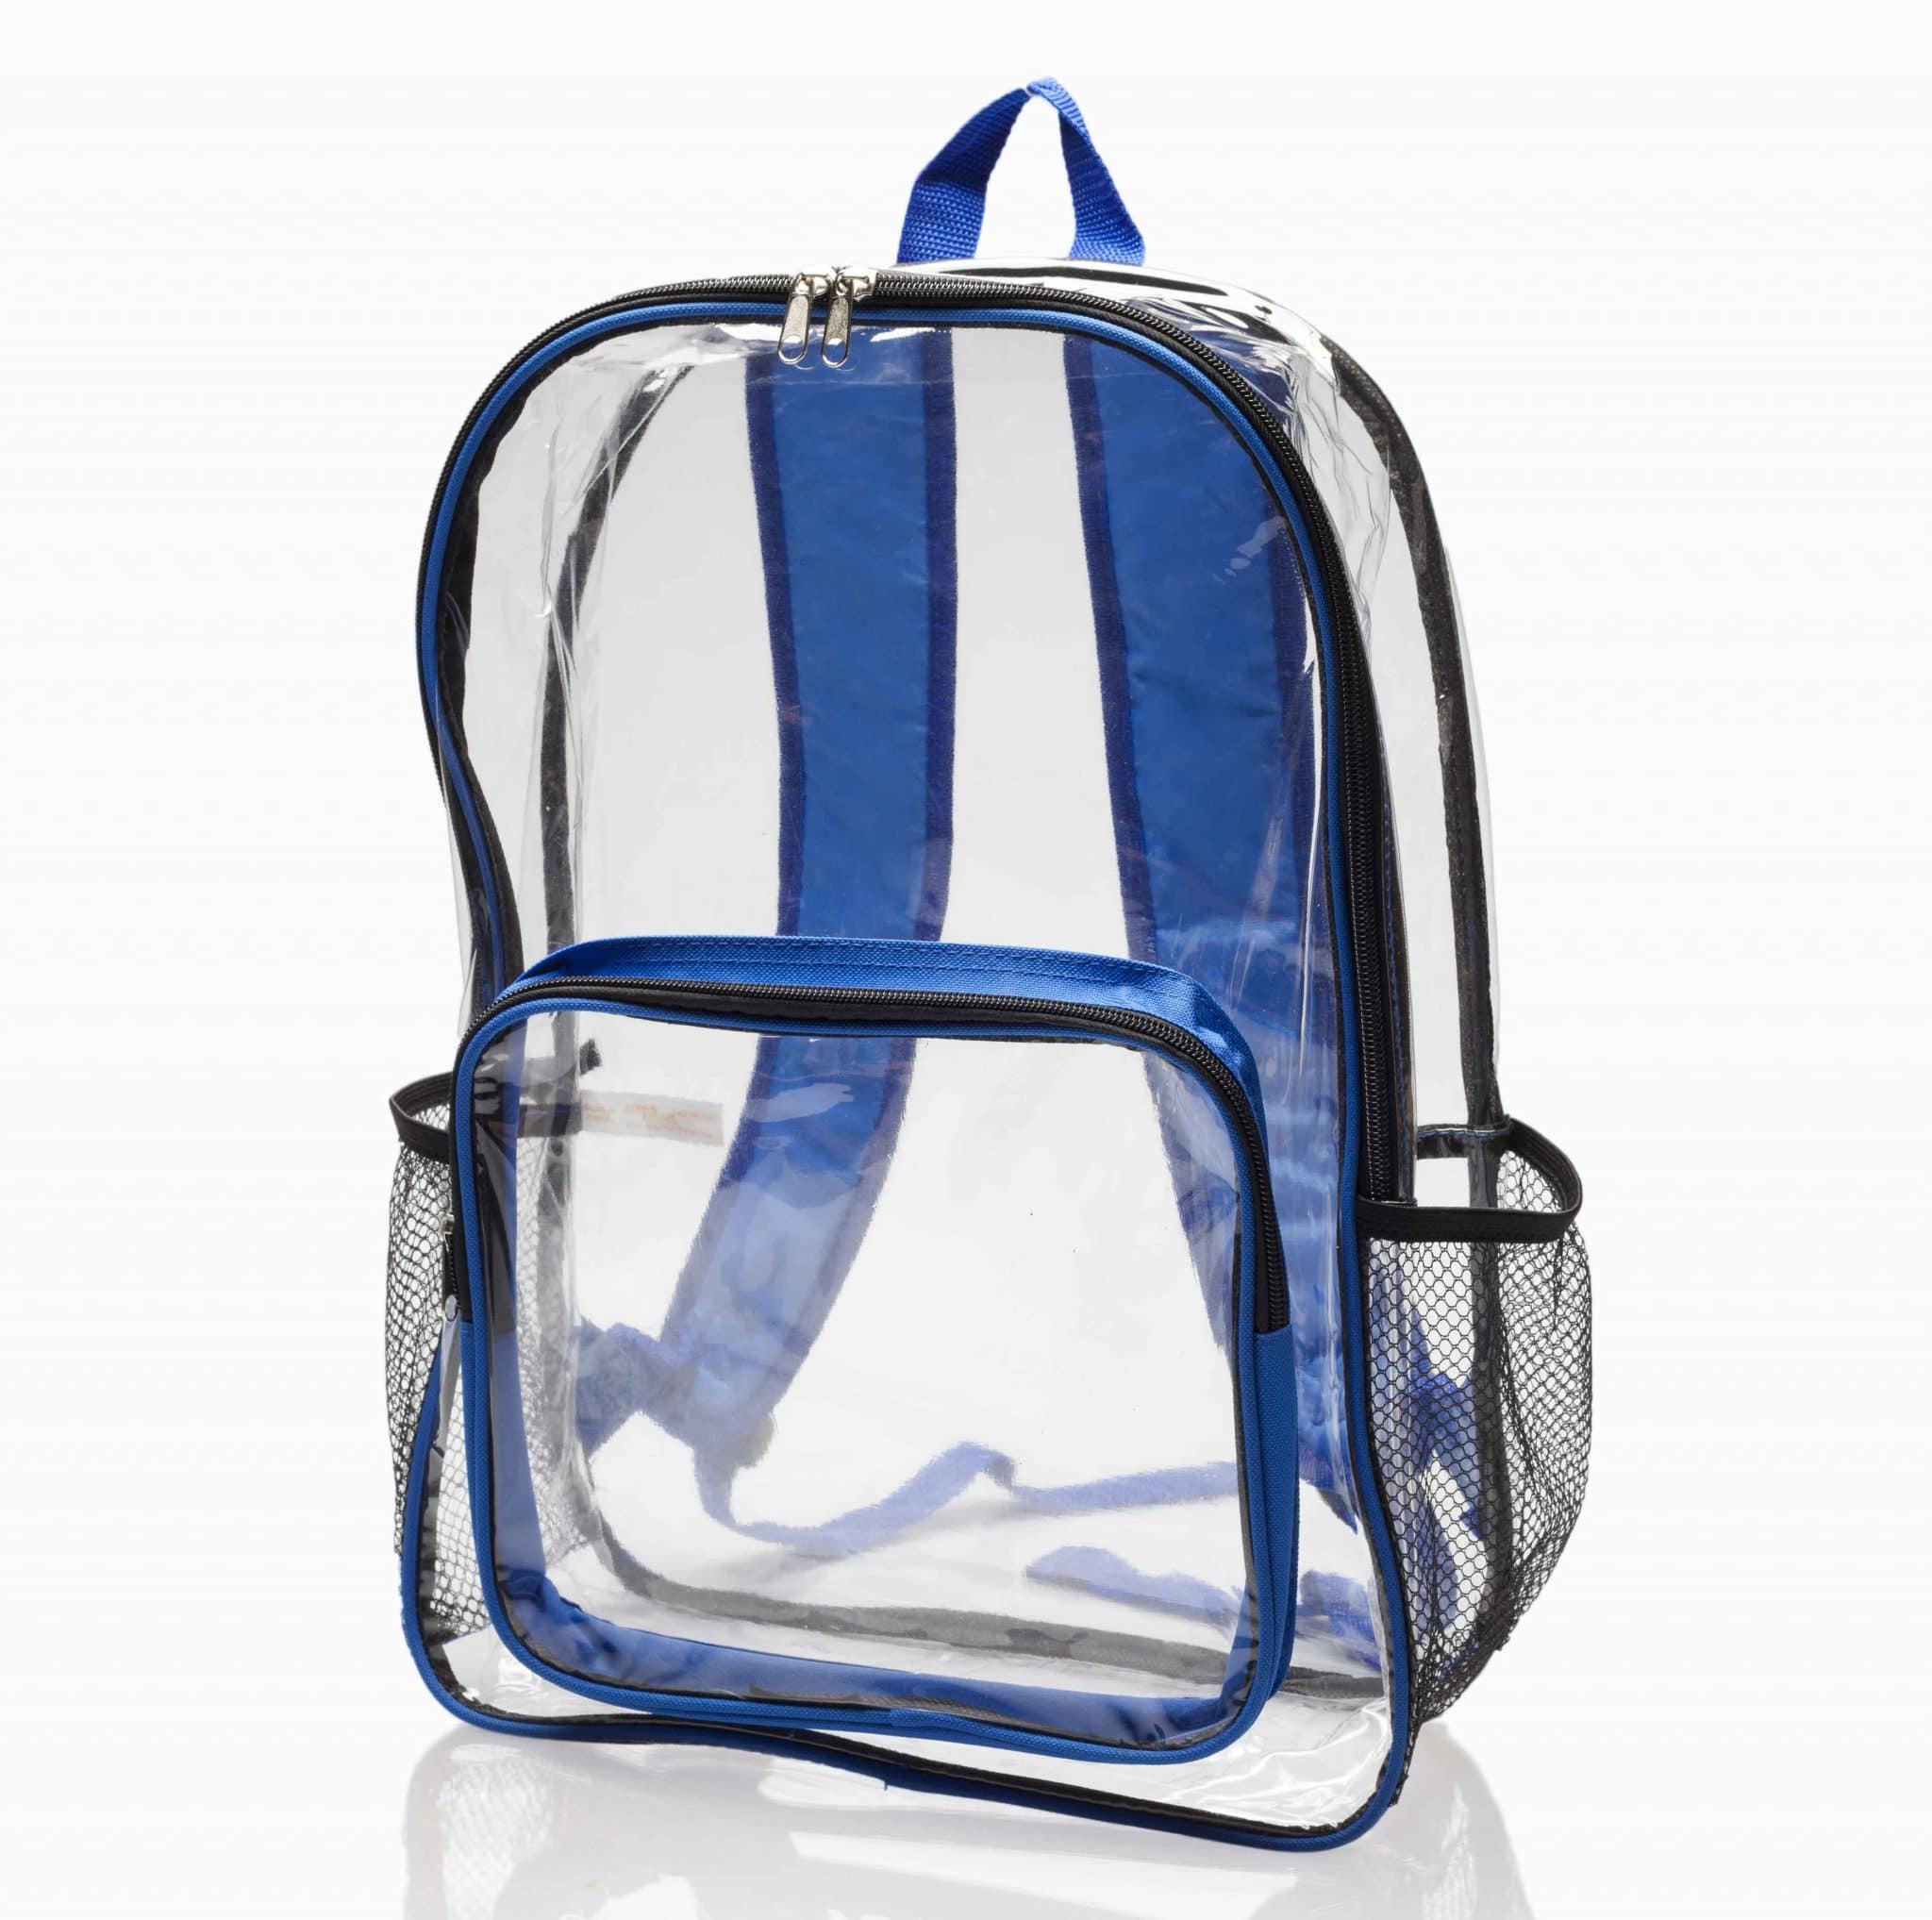 Transparent backpack on white background: a good addition to your Disney World packing list